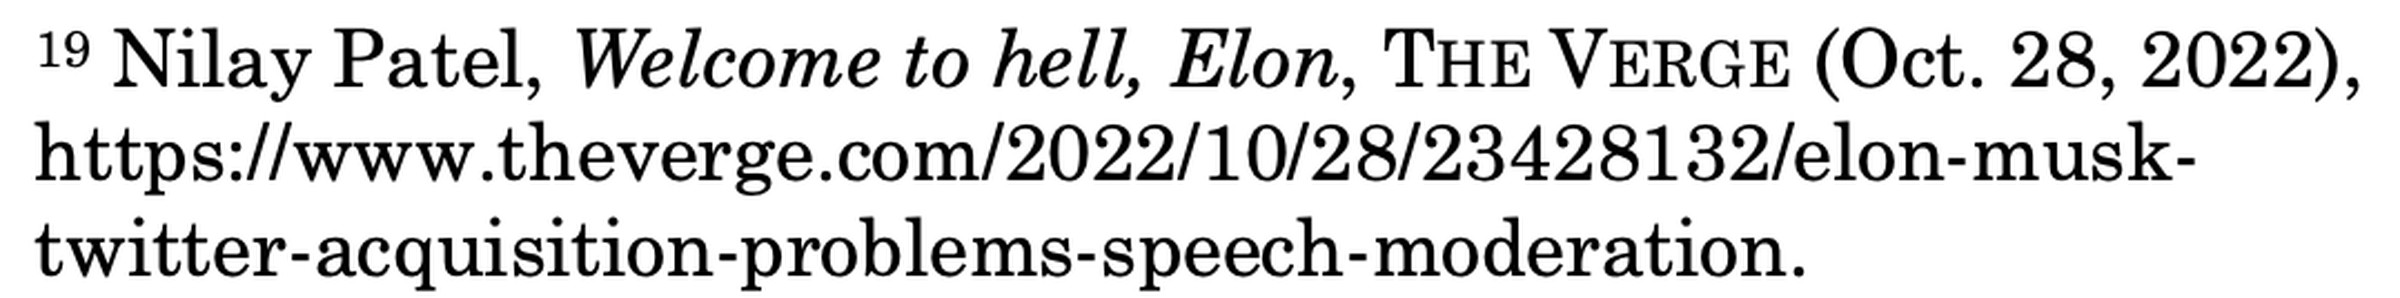 A screenshot of a citation in a Supreme Court brief to “Welcome to hell, Elon” by Nilay Patel at The Verge.